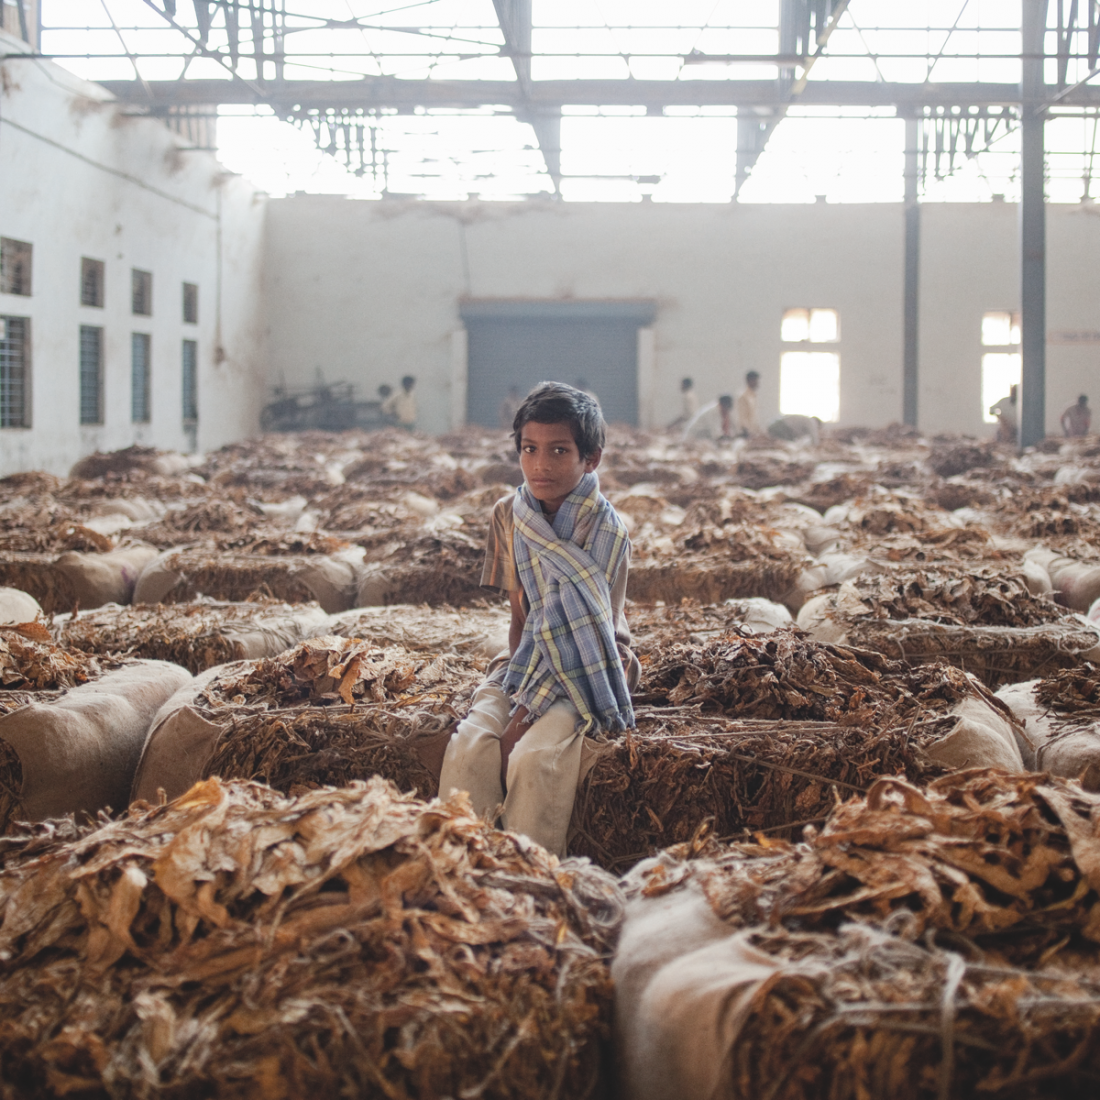 Periyapatna, India A farmer’s child sitting on a tobacco bale on the floor of a tobacco auction house. © Rocco Rorandelli